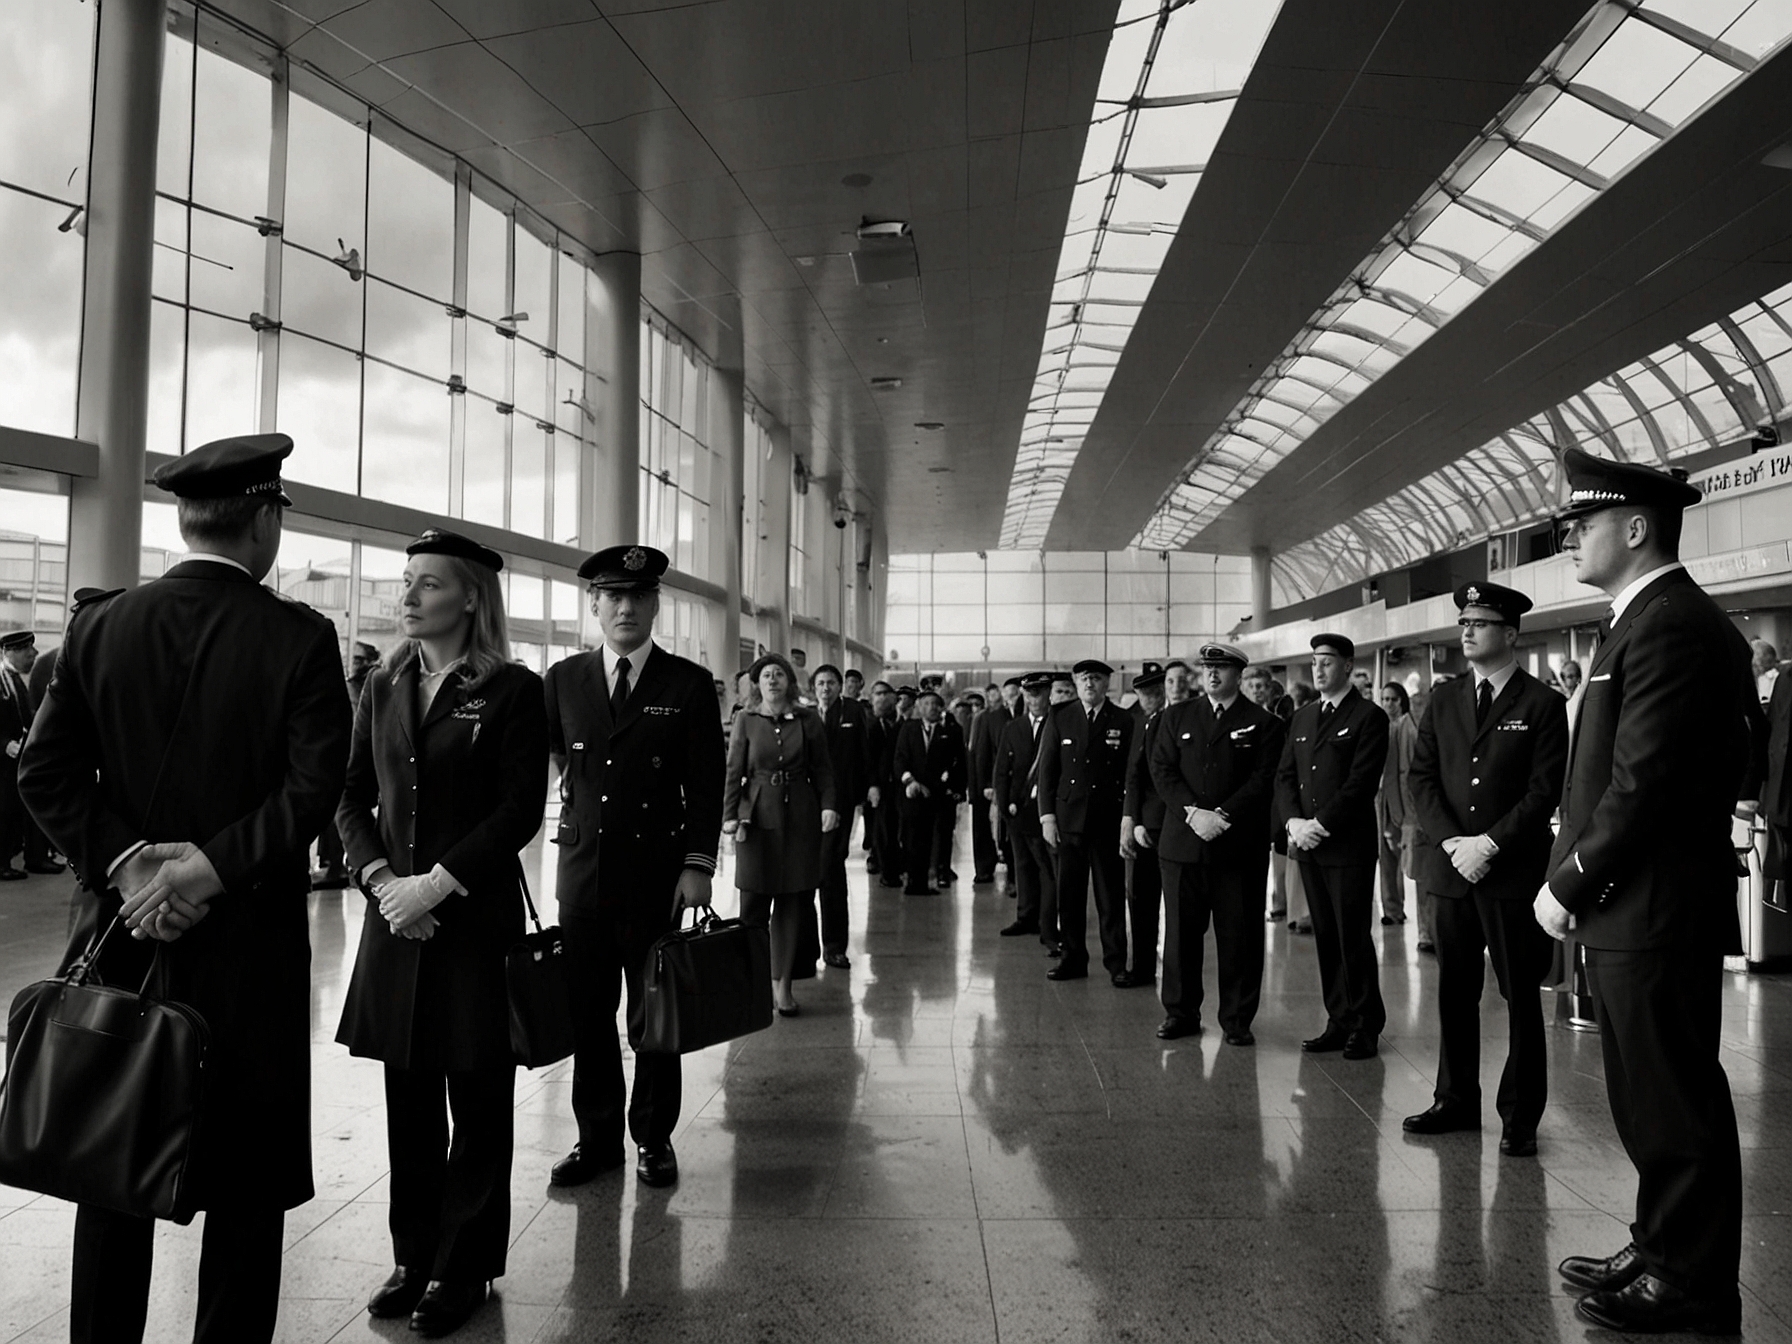 Passengers and airport staff observe the marching pilots at Dublin Airport, showcasing mixed reactions of sympathy and concern over potential travel disruptions due to the strike.